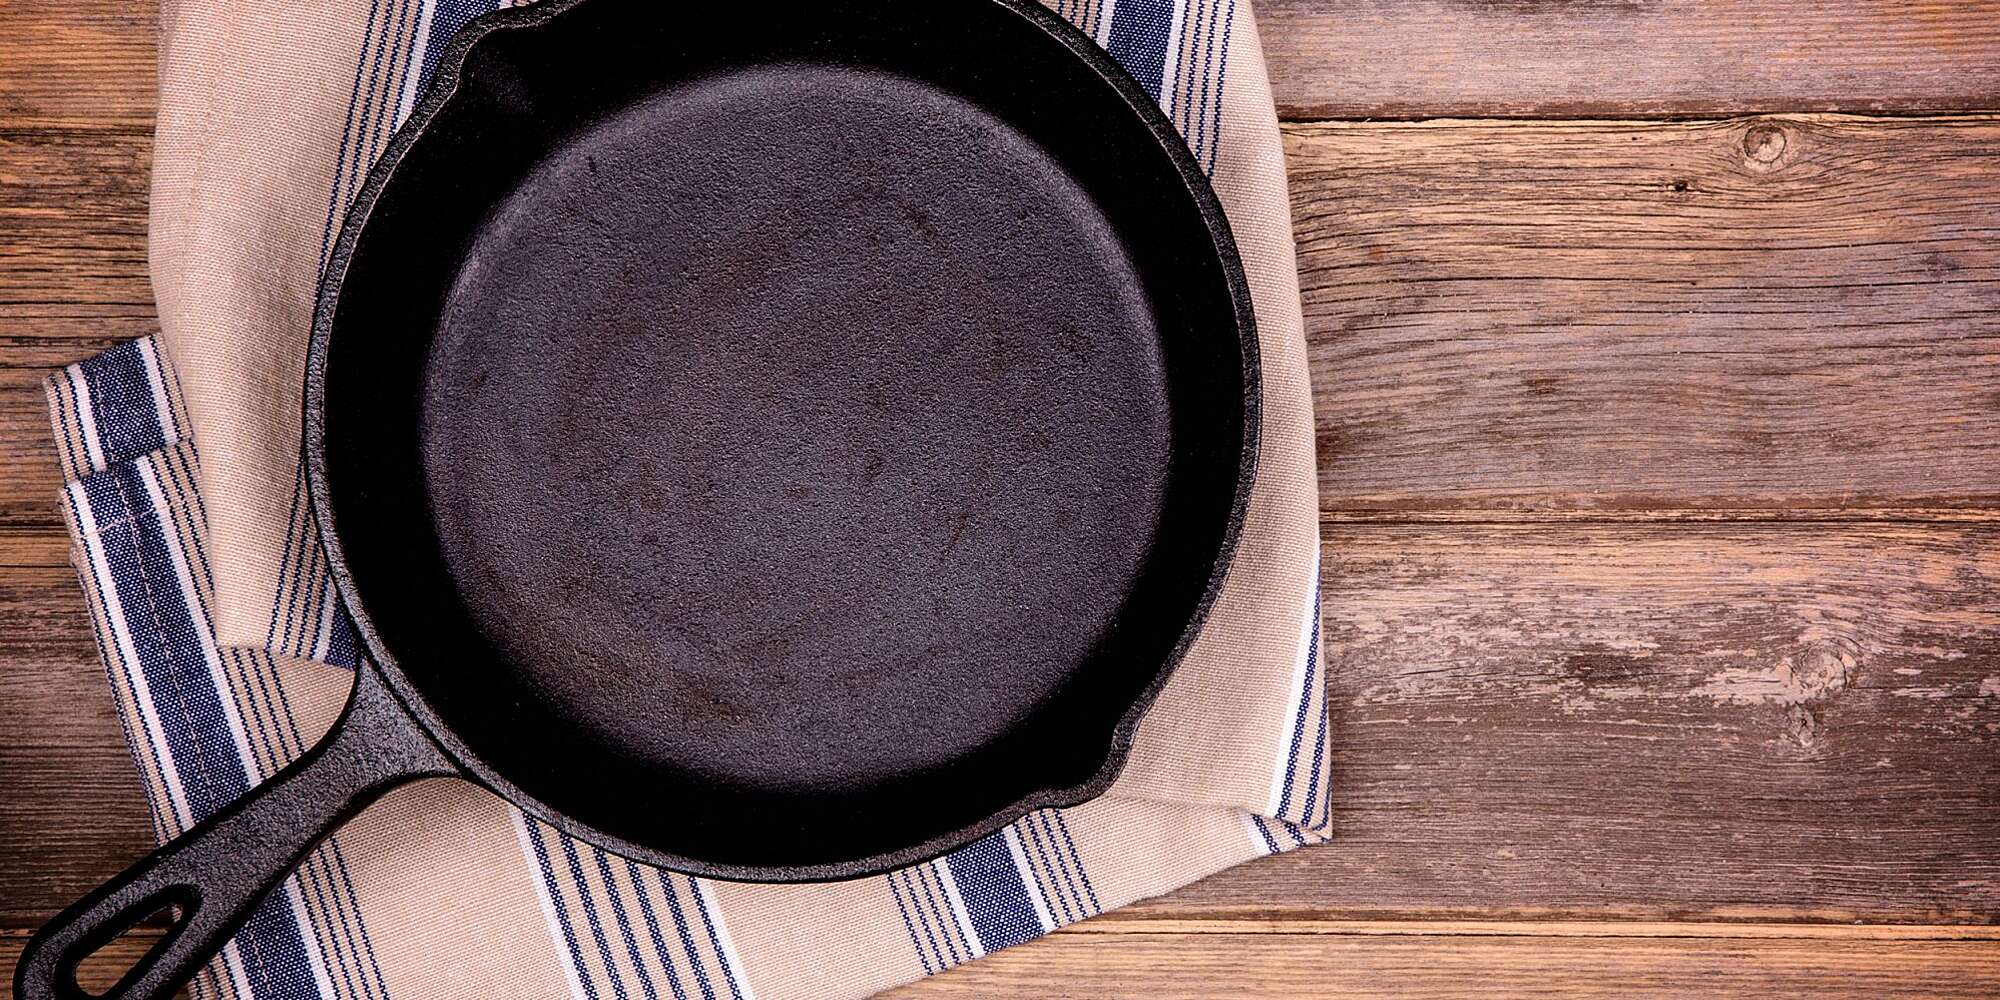 Choosing the Best Cast Iron Cookware for Your Home in 2020